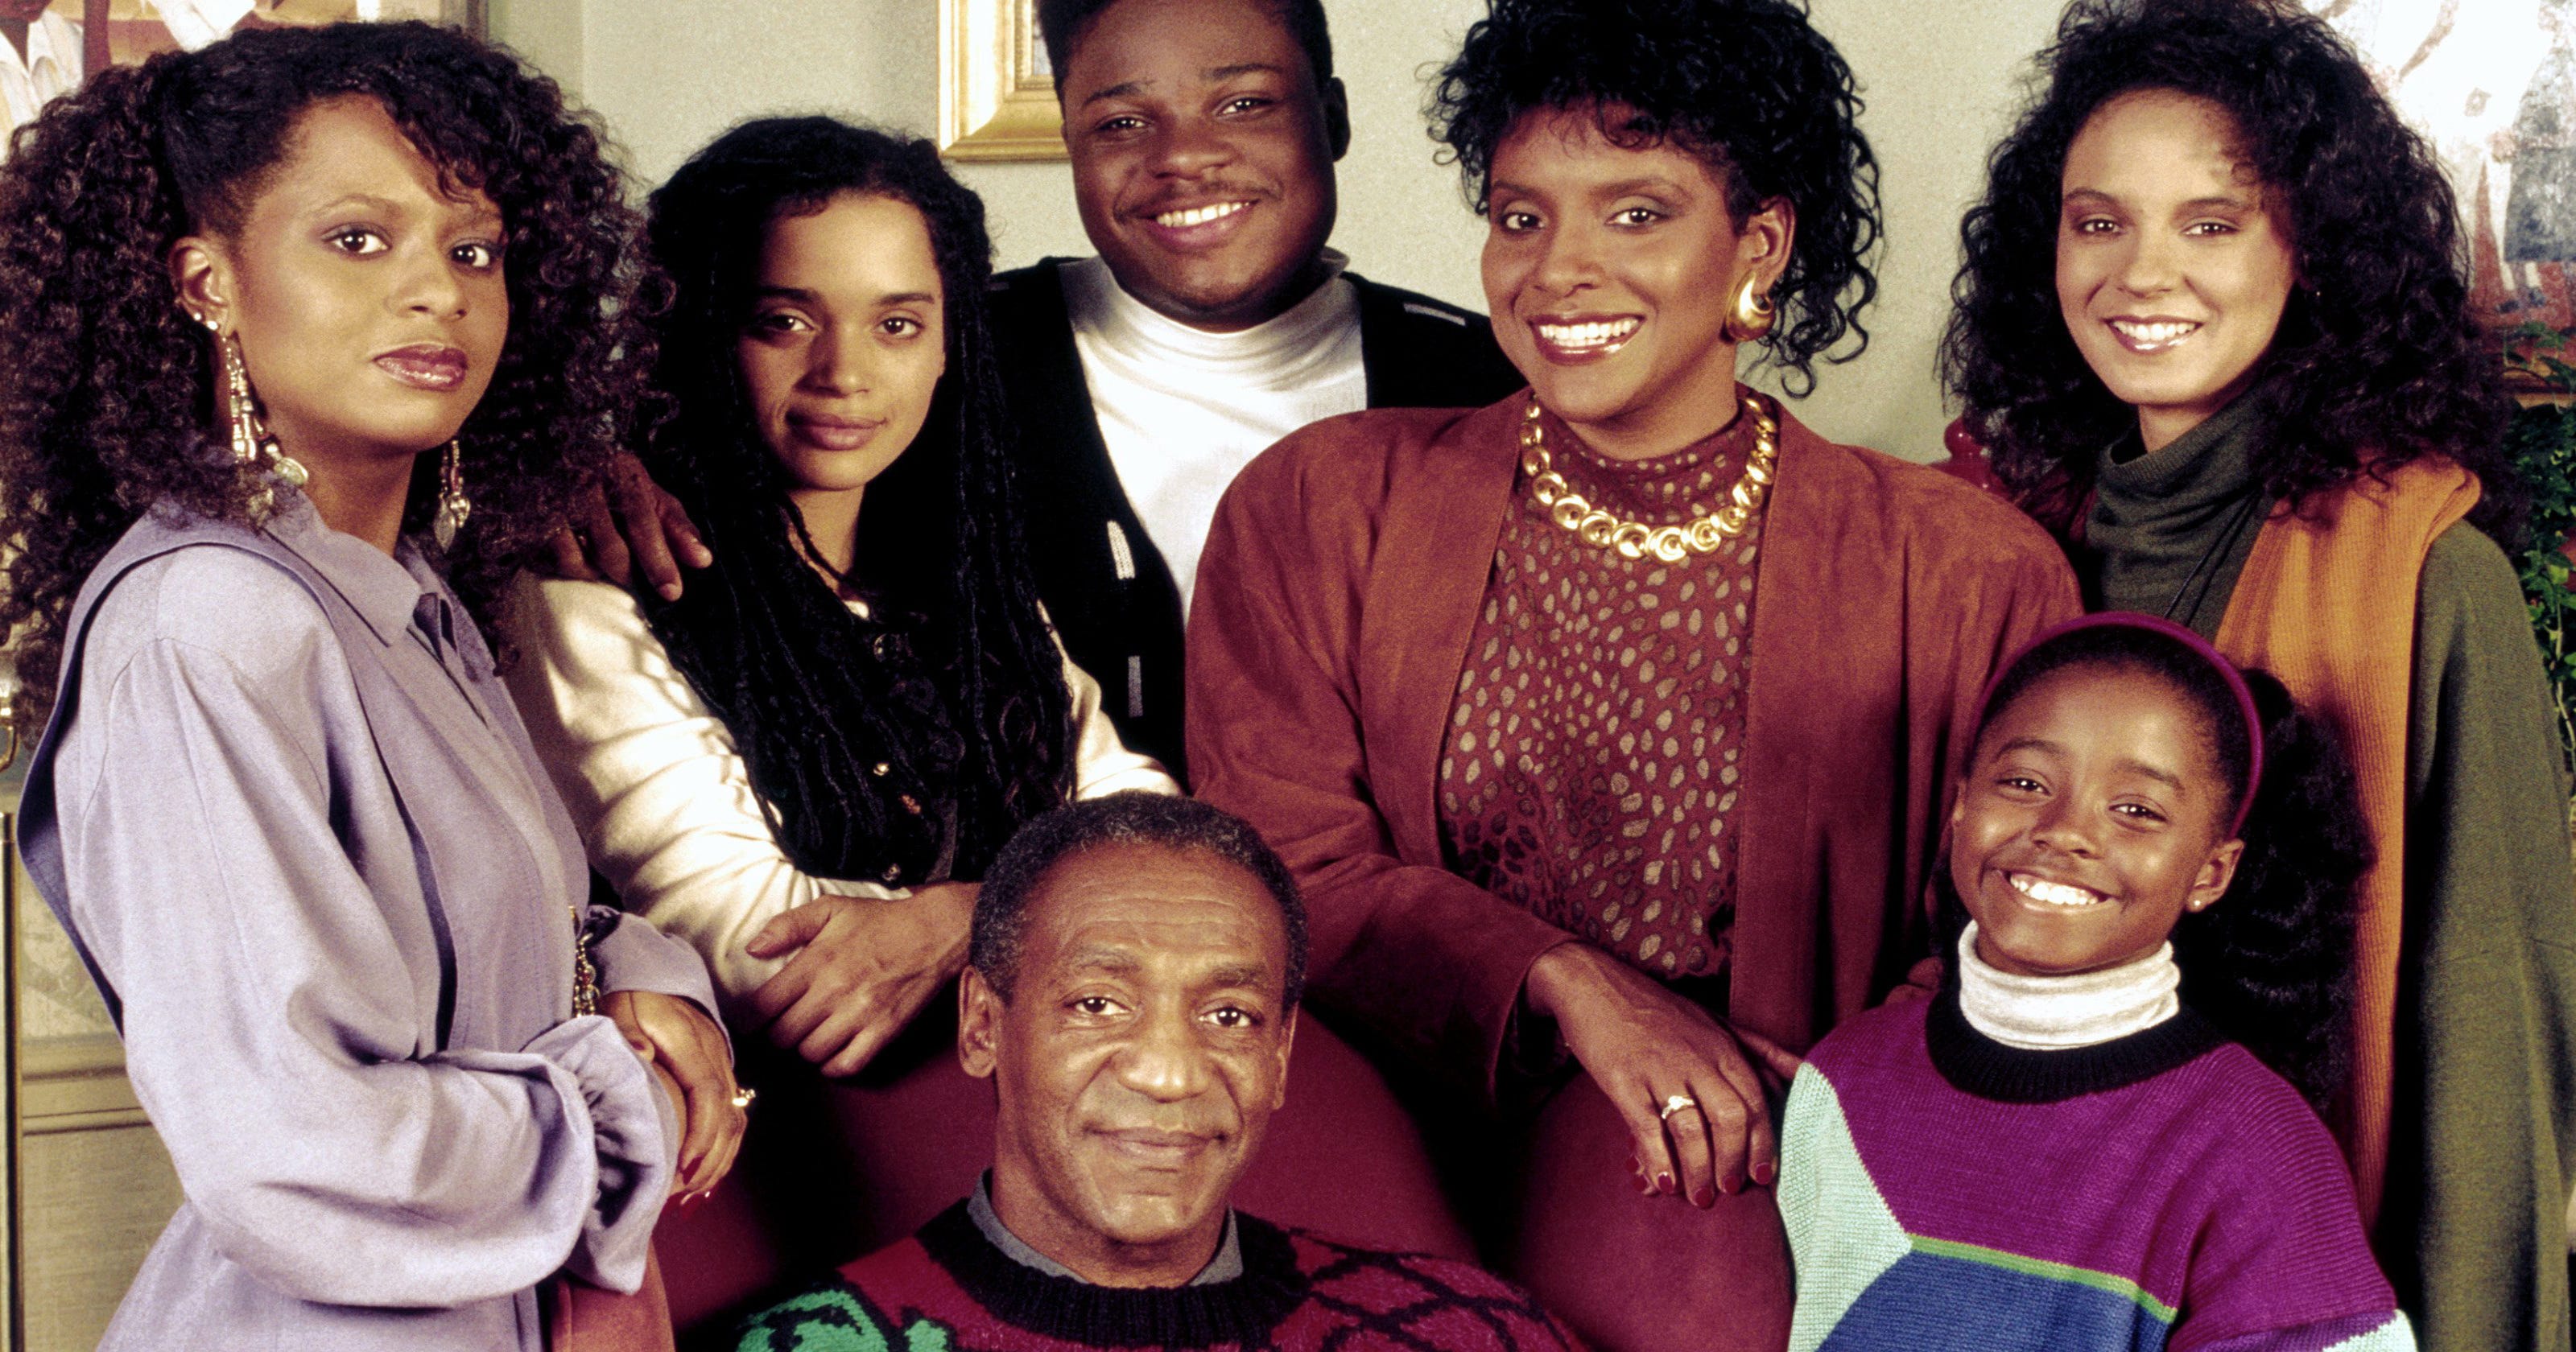 'The Cosby Show': Where are they now?